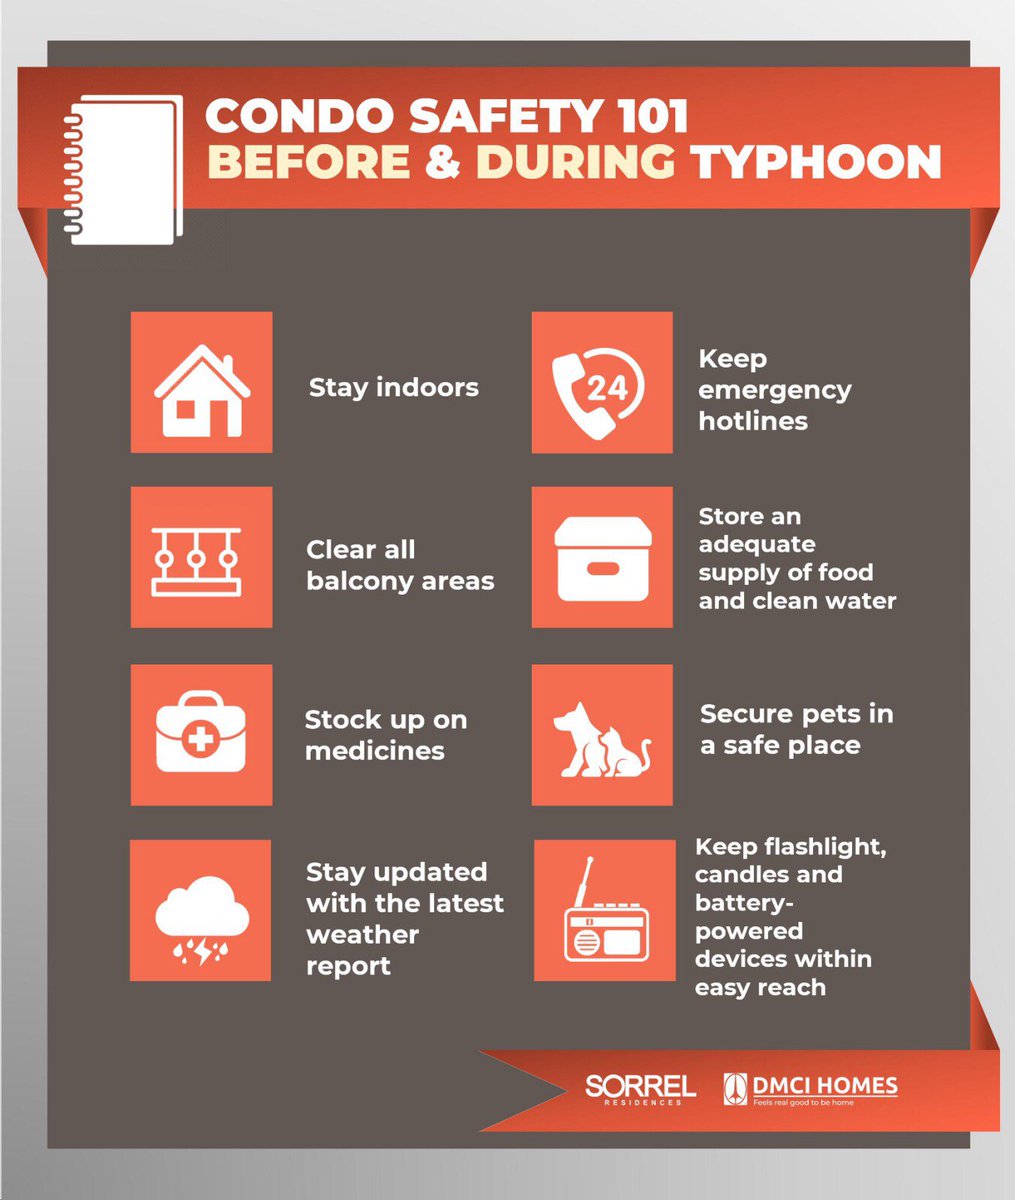 As we brace for the incoming typhoon, here are some quick things for all of us to keep in mind.
#safetyreminders
#SafeSorrel
#CondoSafety 
————————————————
📞+63(2)7000-2114 Concierge
📱+63(933)828-6548 Security Office

📱+63(917)628-5486 PMO
📞+63(2)8879-0530 PMO